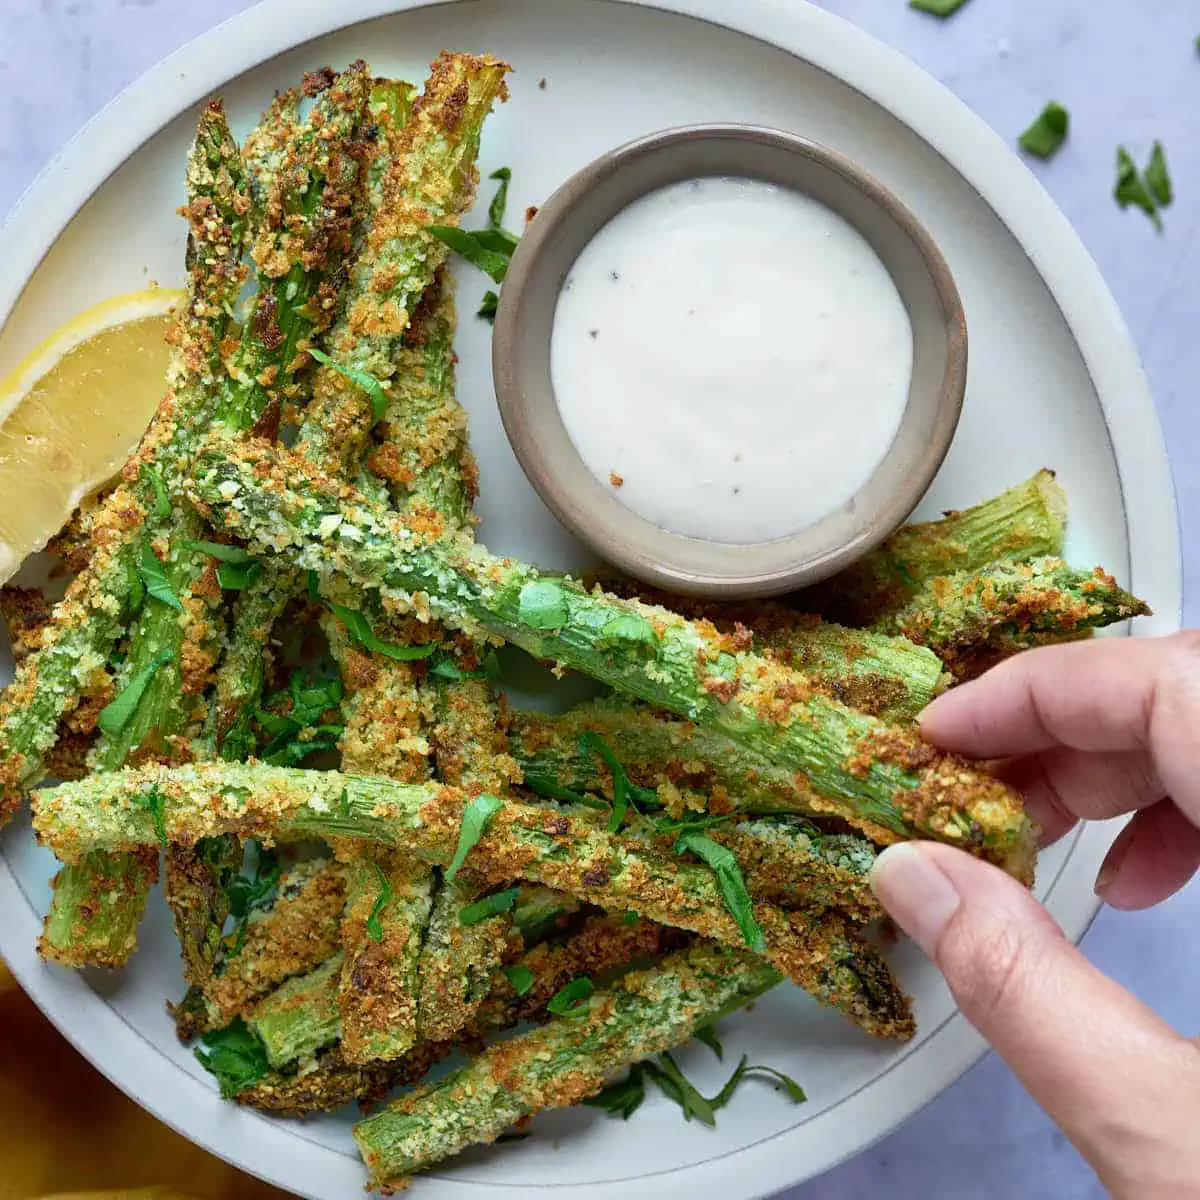 Asparagus fries made in the air fryer and served with dipping sauce, and garnished with herbs.